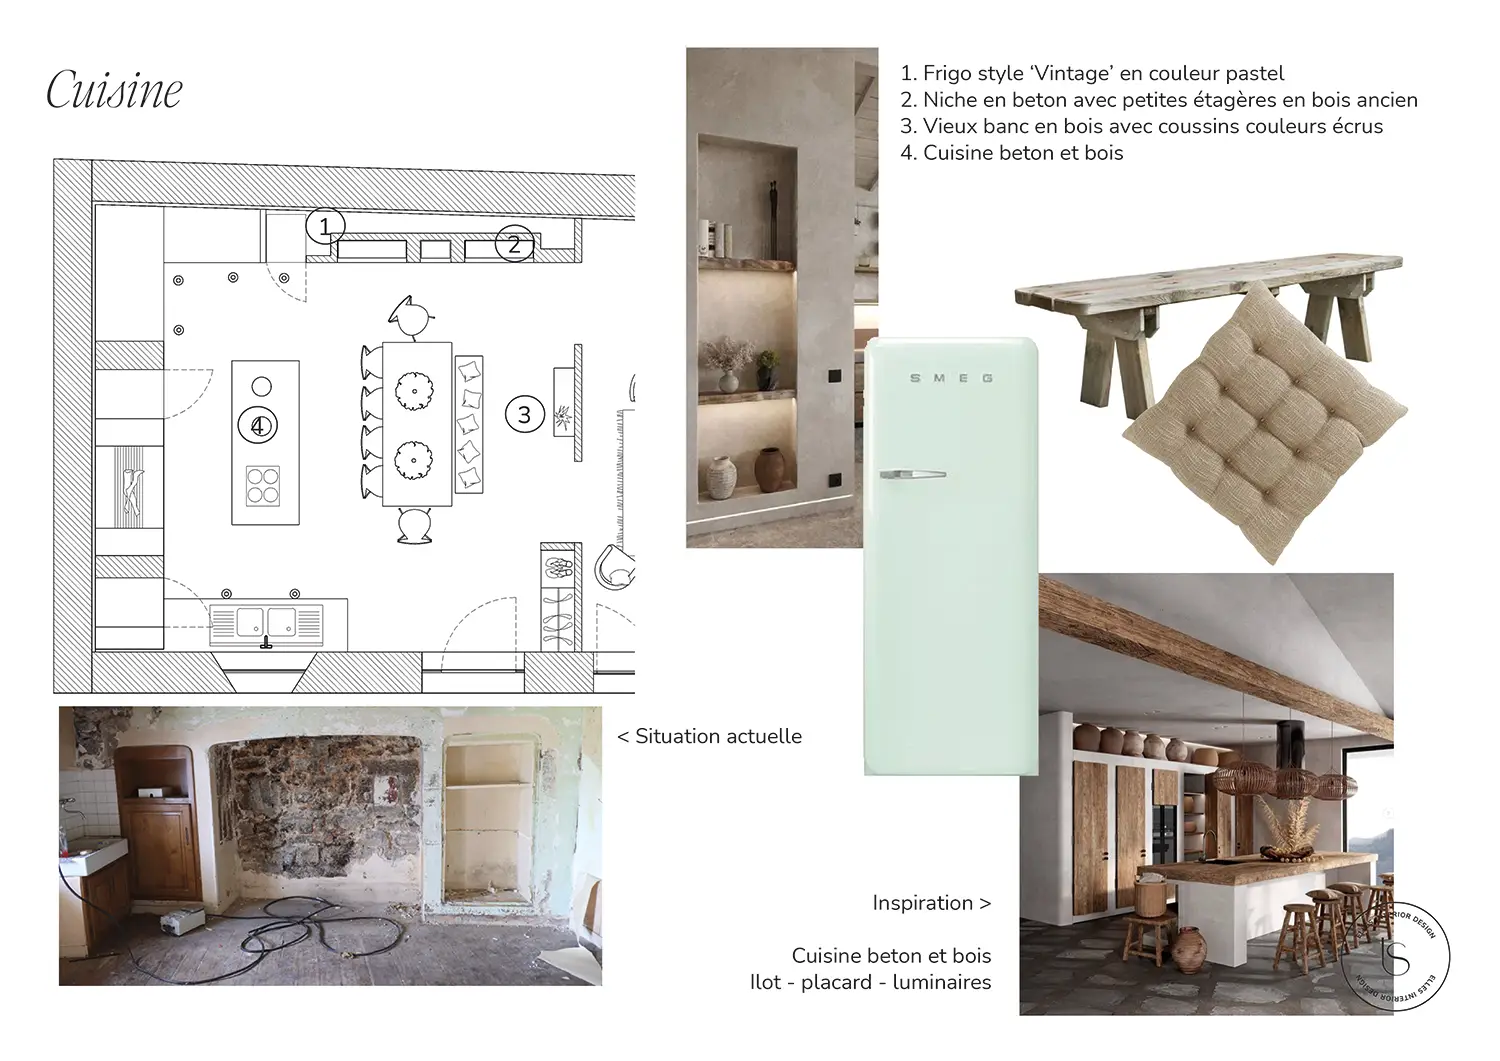 Mood board and furniture advice for the renovation of a country house in Auvergne; Project carried out by Elles Interior Design.